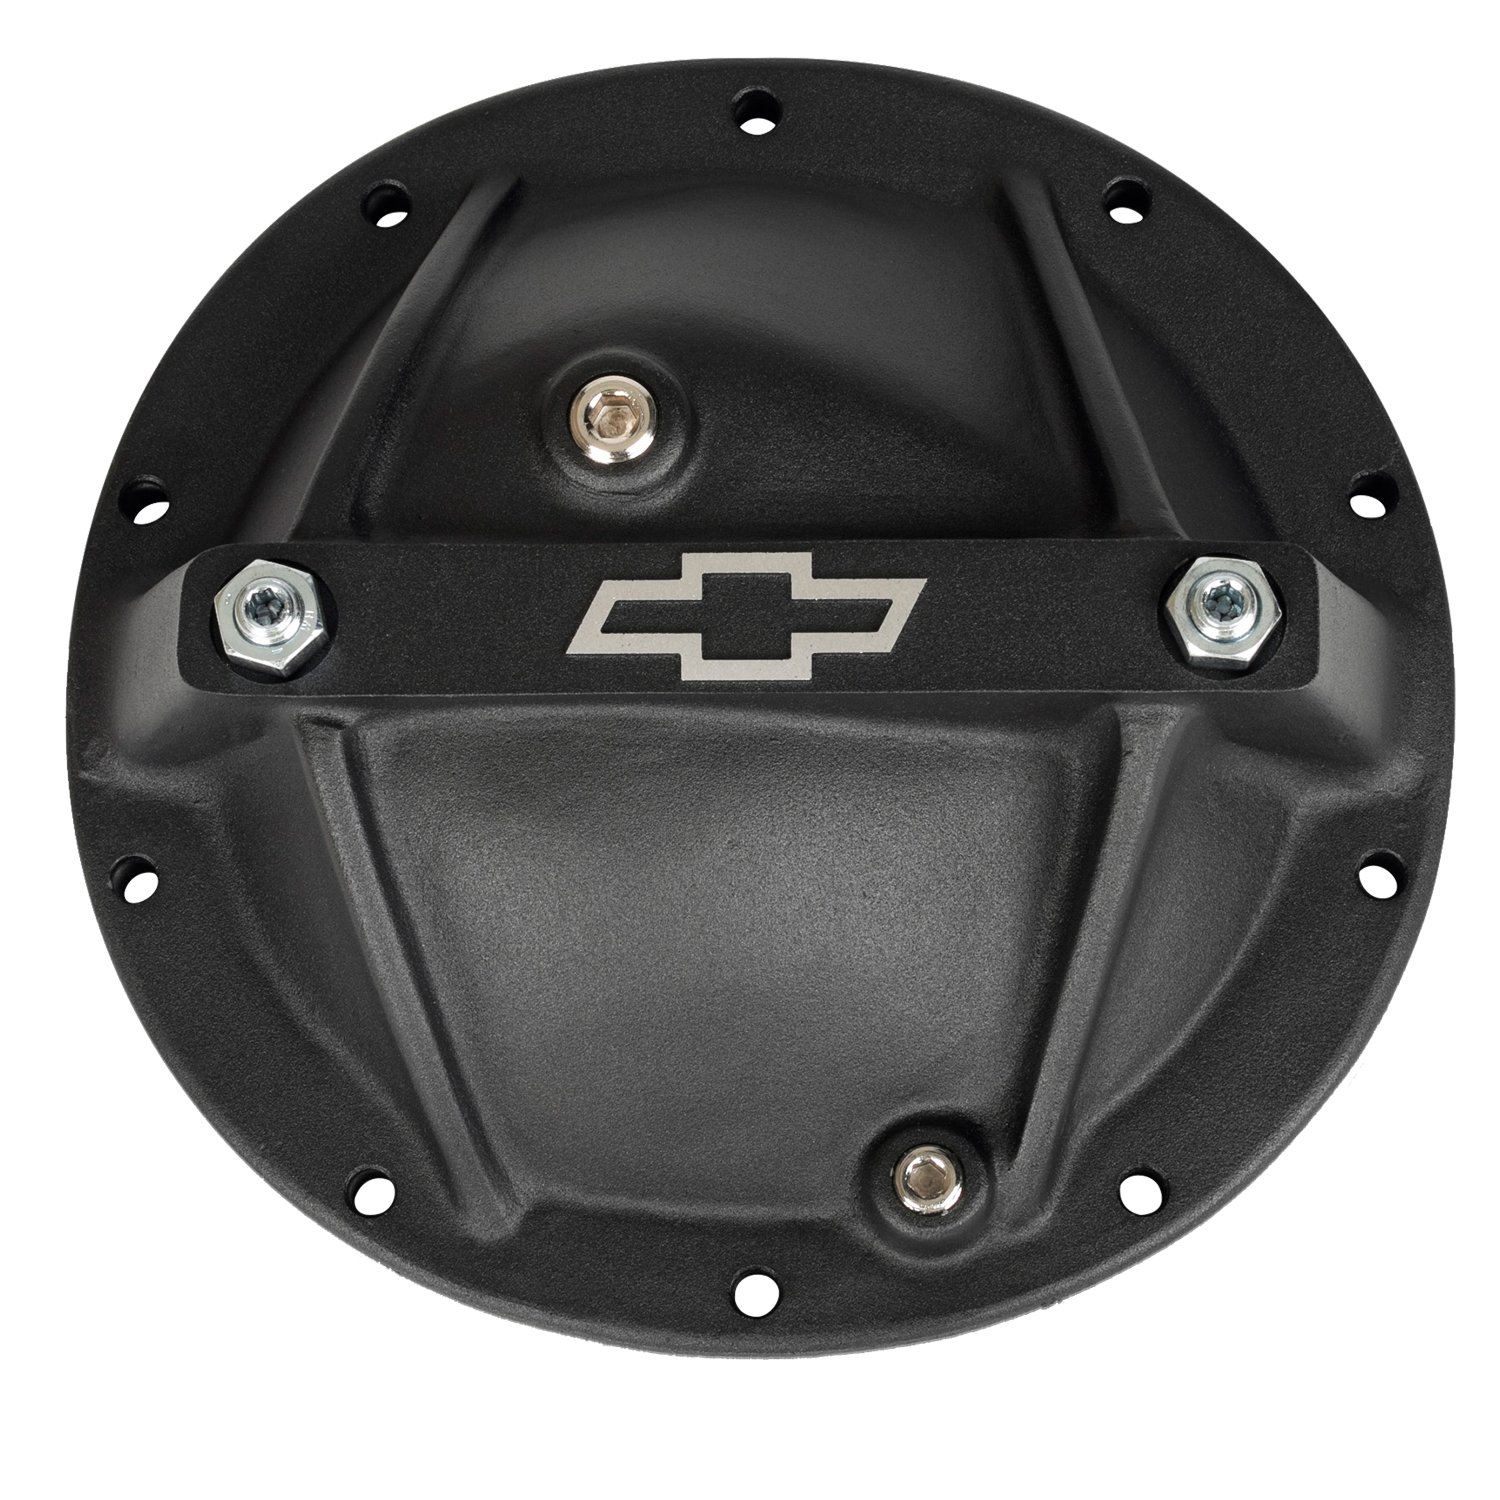 Chevrolet Performance Bowtie Differential Cover